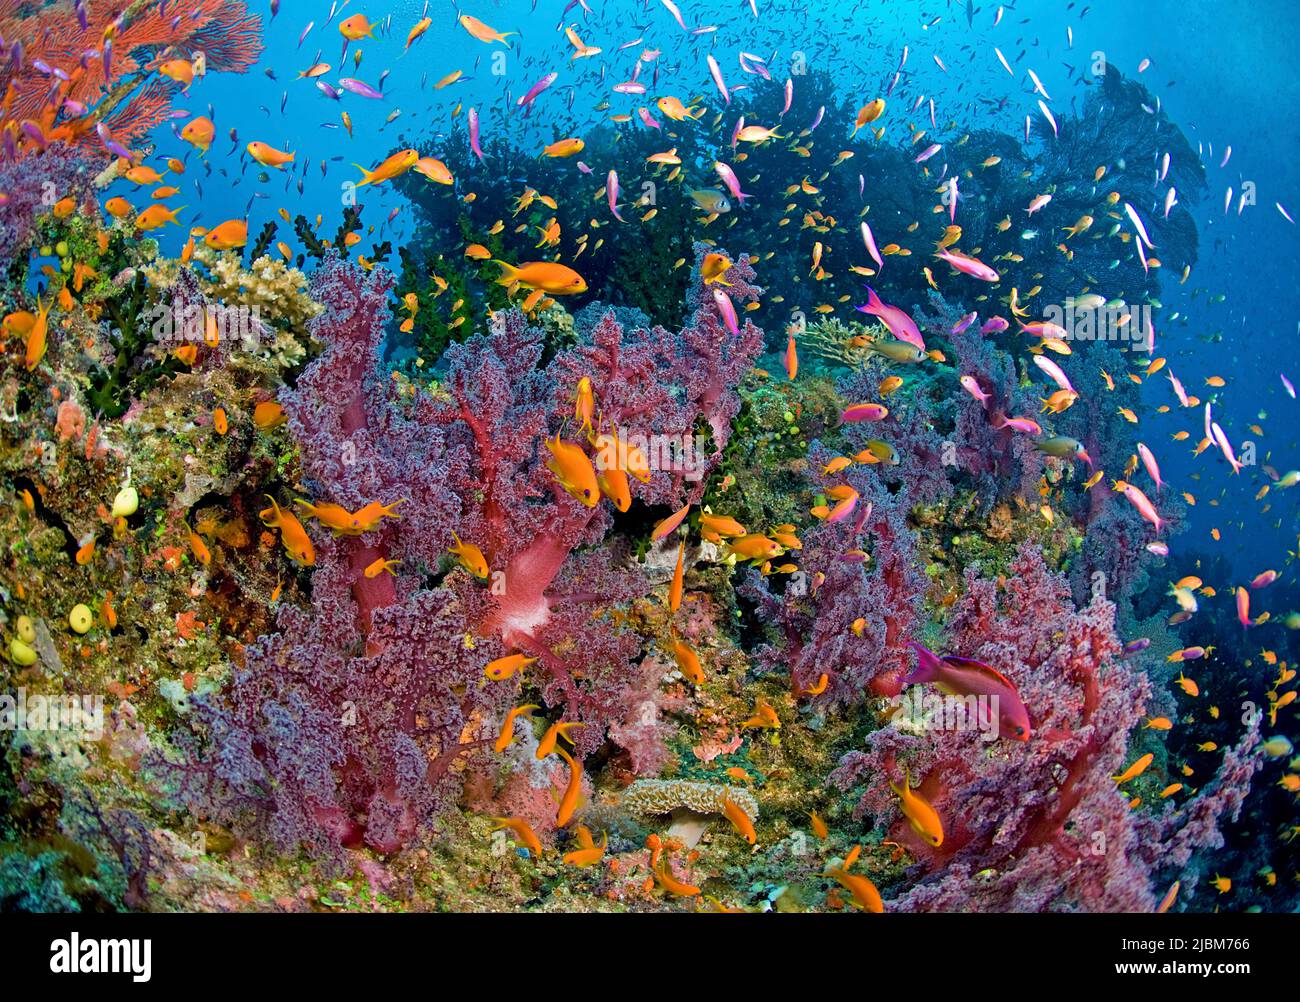 Jewel fairy basslet or lyretail anthias (Pseudanthias squamipinnis) cruising over a tropical coral reef, Fiji, Oceania, Pacific Ocean Stock Photo